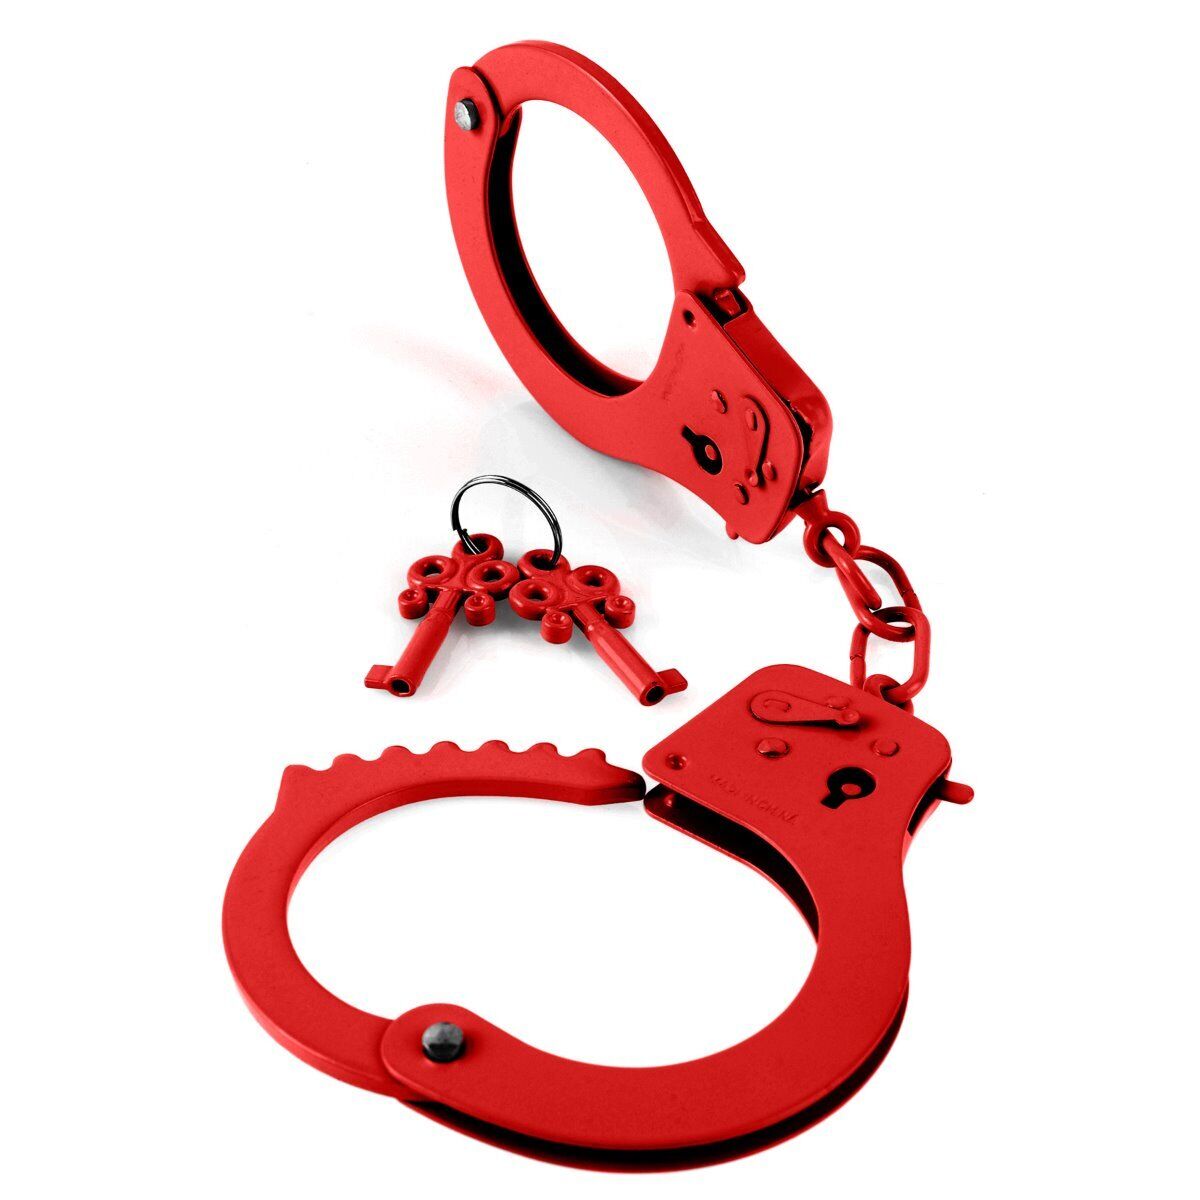 Red Steel Metal Handcuffs Restraints Wrist Cuffs Not for Professional Use